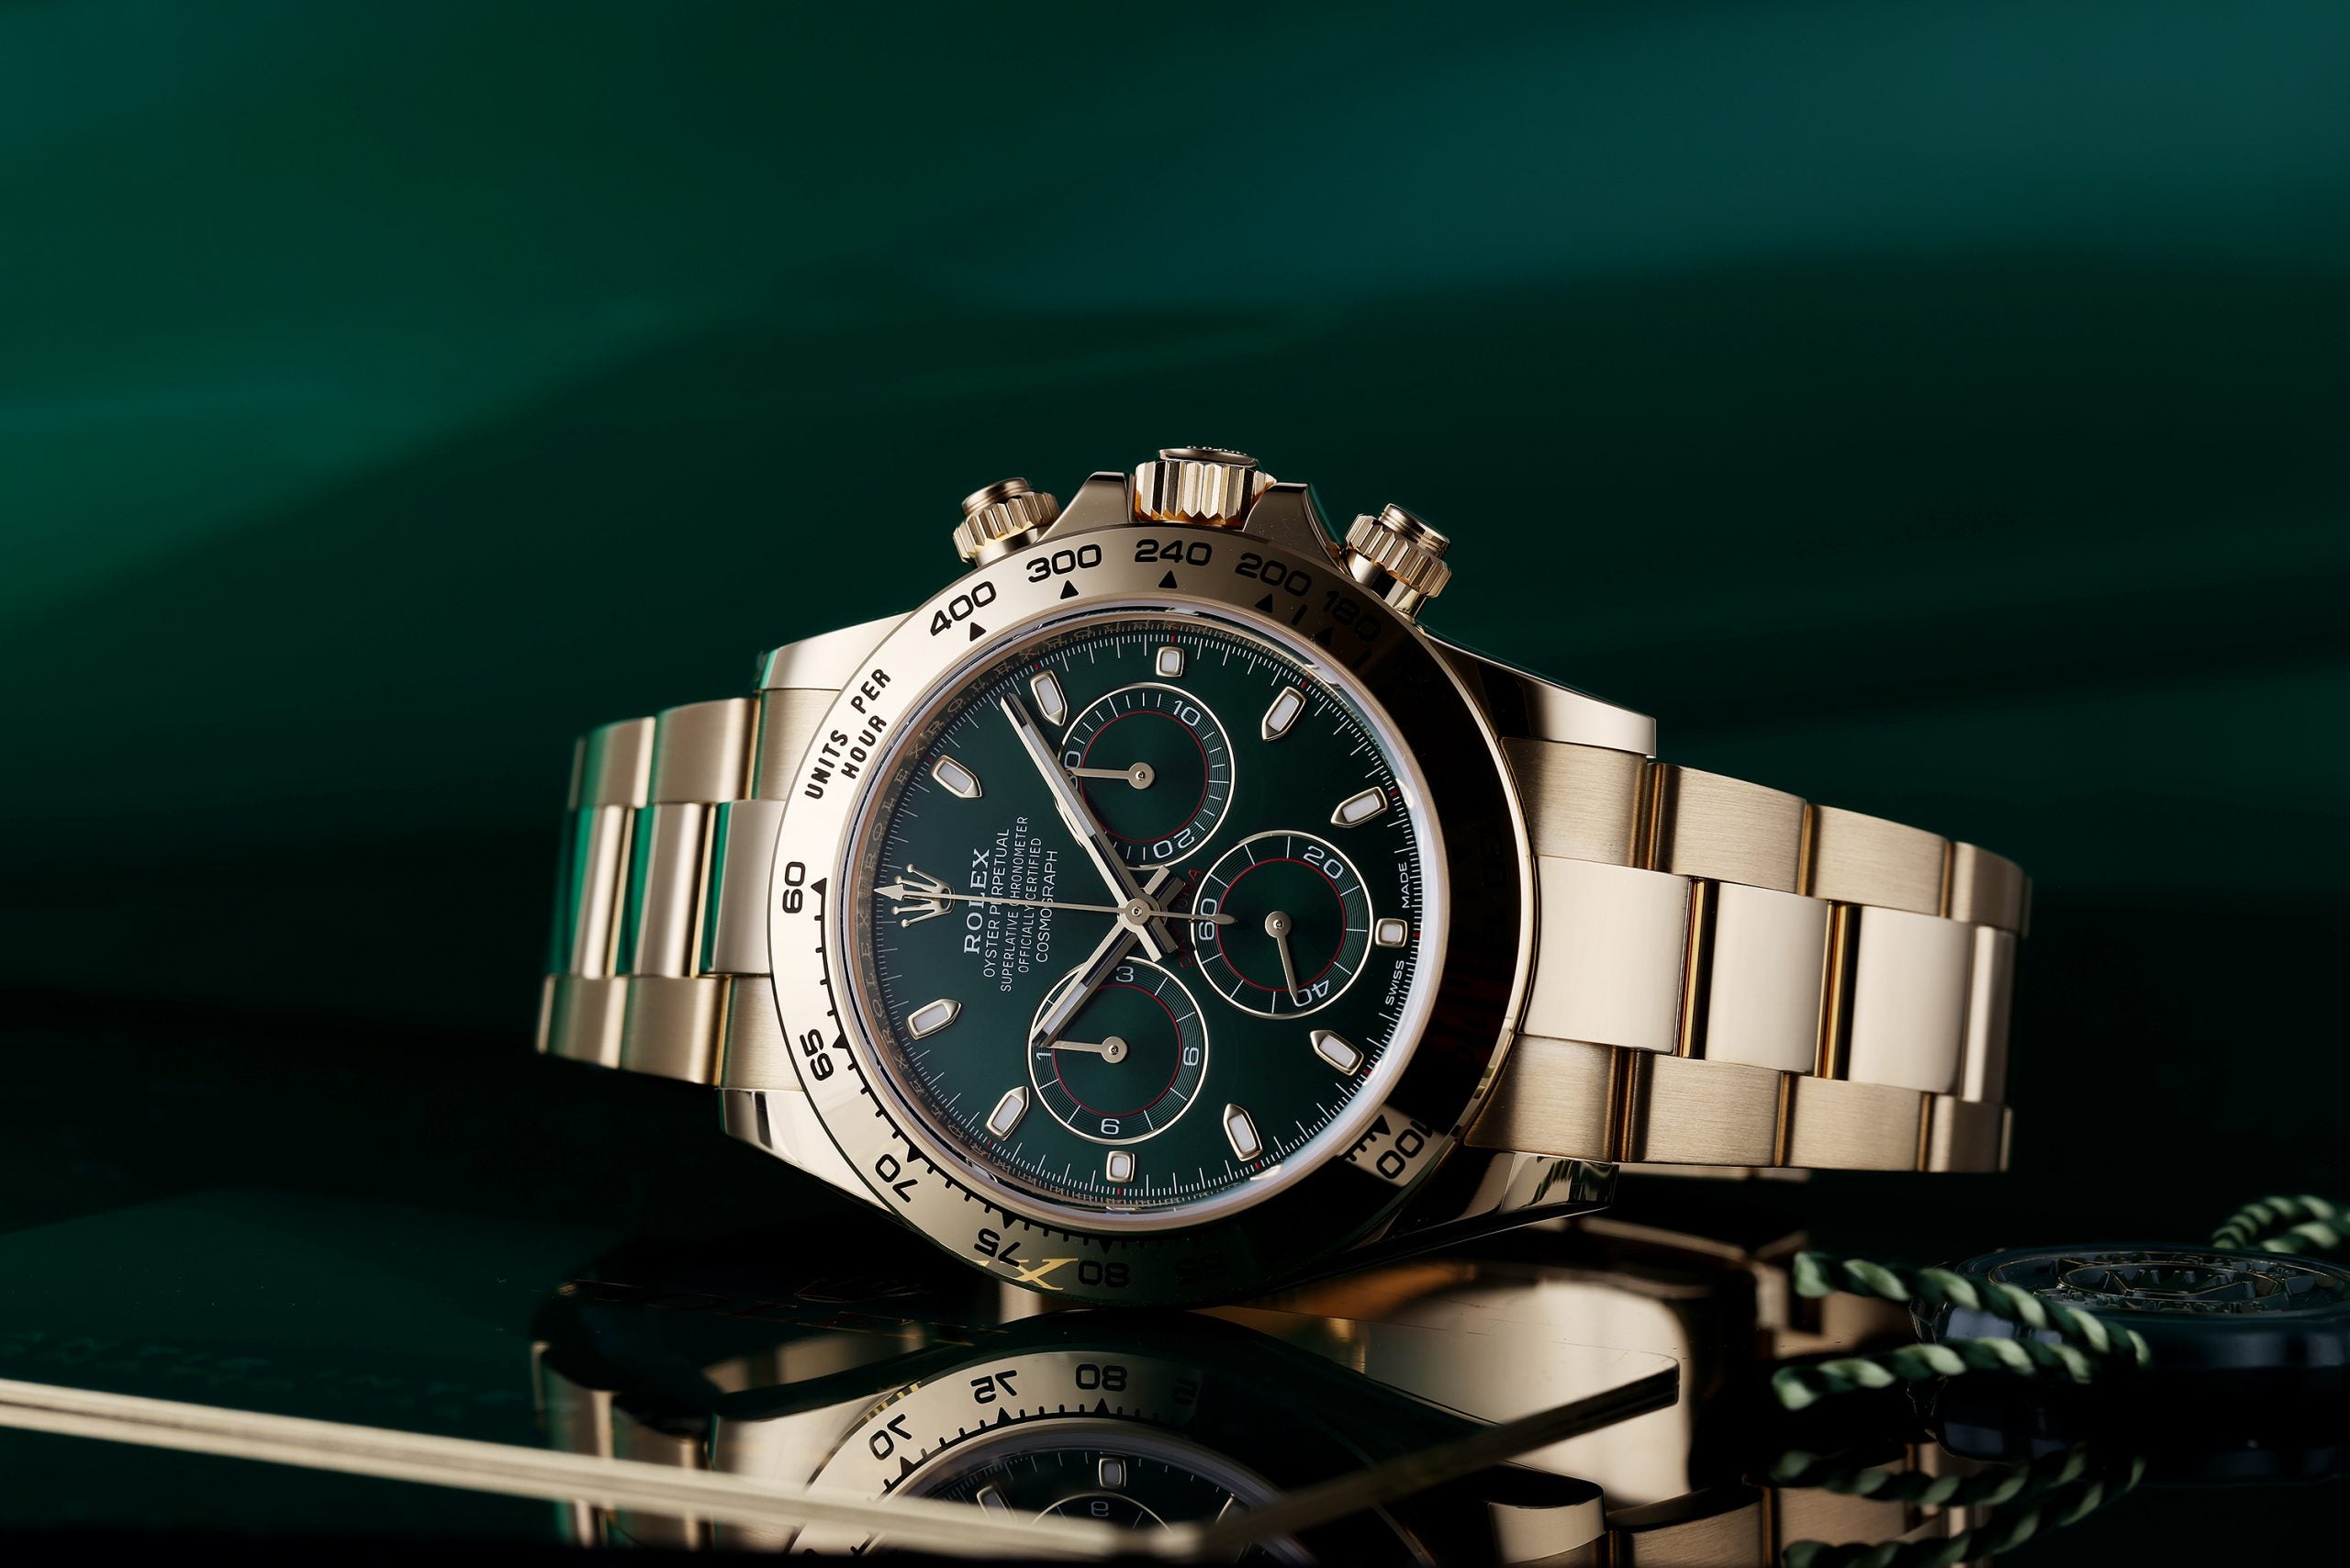 The One: The Rolex Daytona Reference 116508 in gold with a green dial